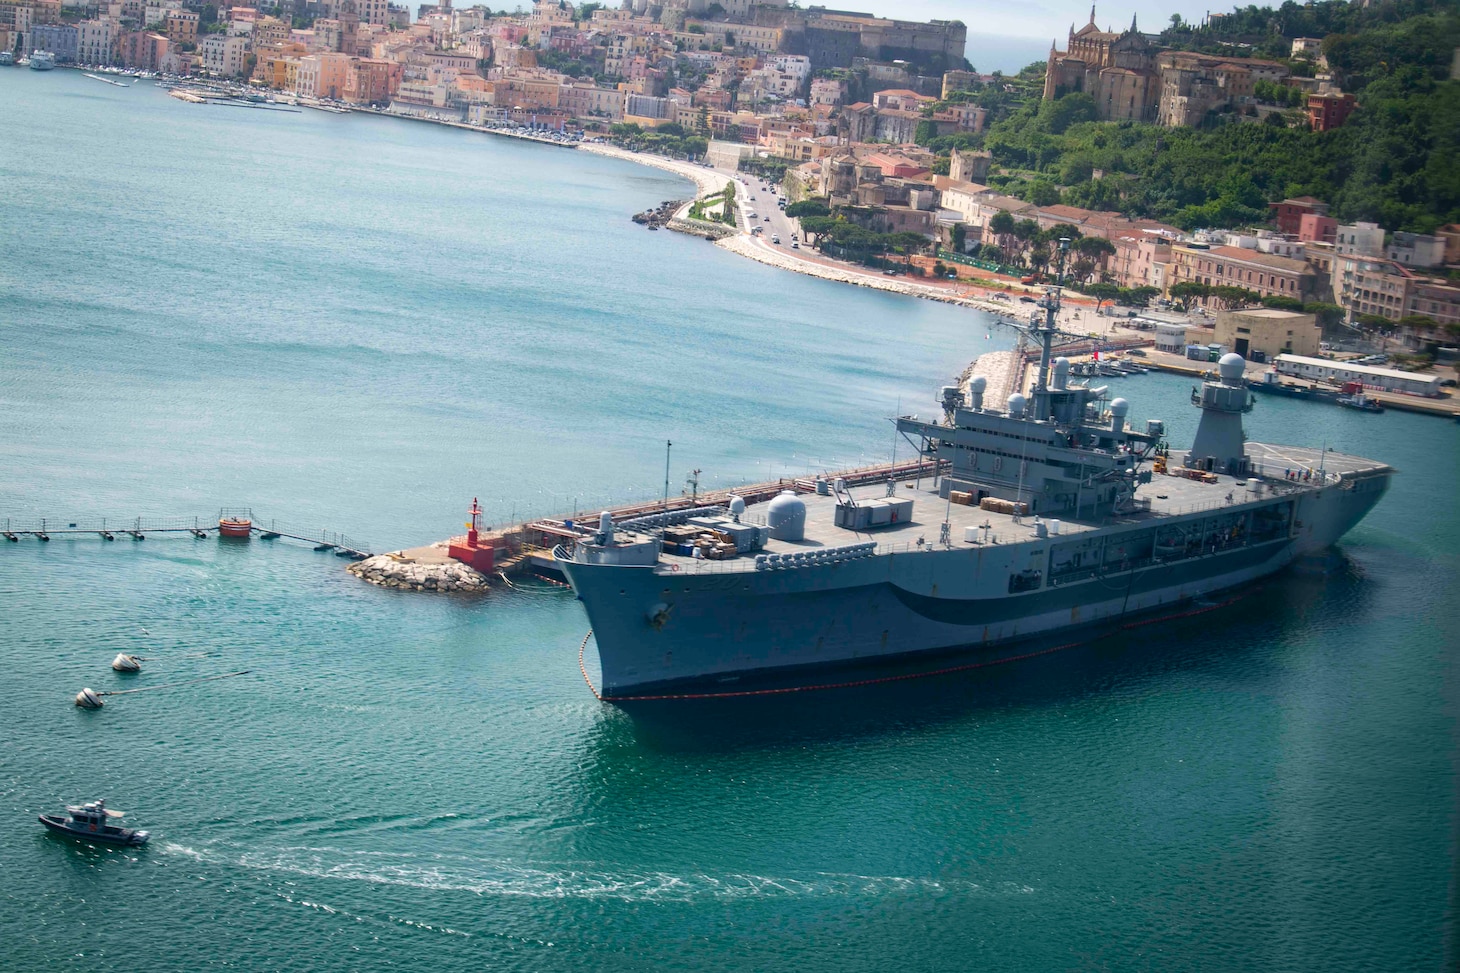 The Blue Ridge-class command and control ship USS Mount Whitney (LCC 20) sits in port in Gaeta, Italy, May 15, 2020. Mount Whitney is currently practicing social distancing and other protective measures in response to COVID-19. Mount Whitney is the U.S. 6th Fleet flagship, homeported in Gaeta, and operates with a combined crew of U.S. Sailors and Military Sealift Command civil service mariners.